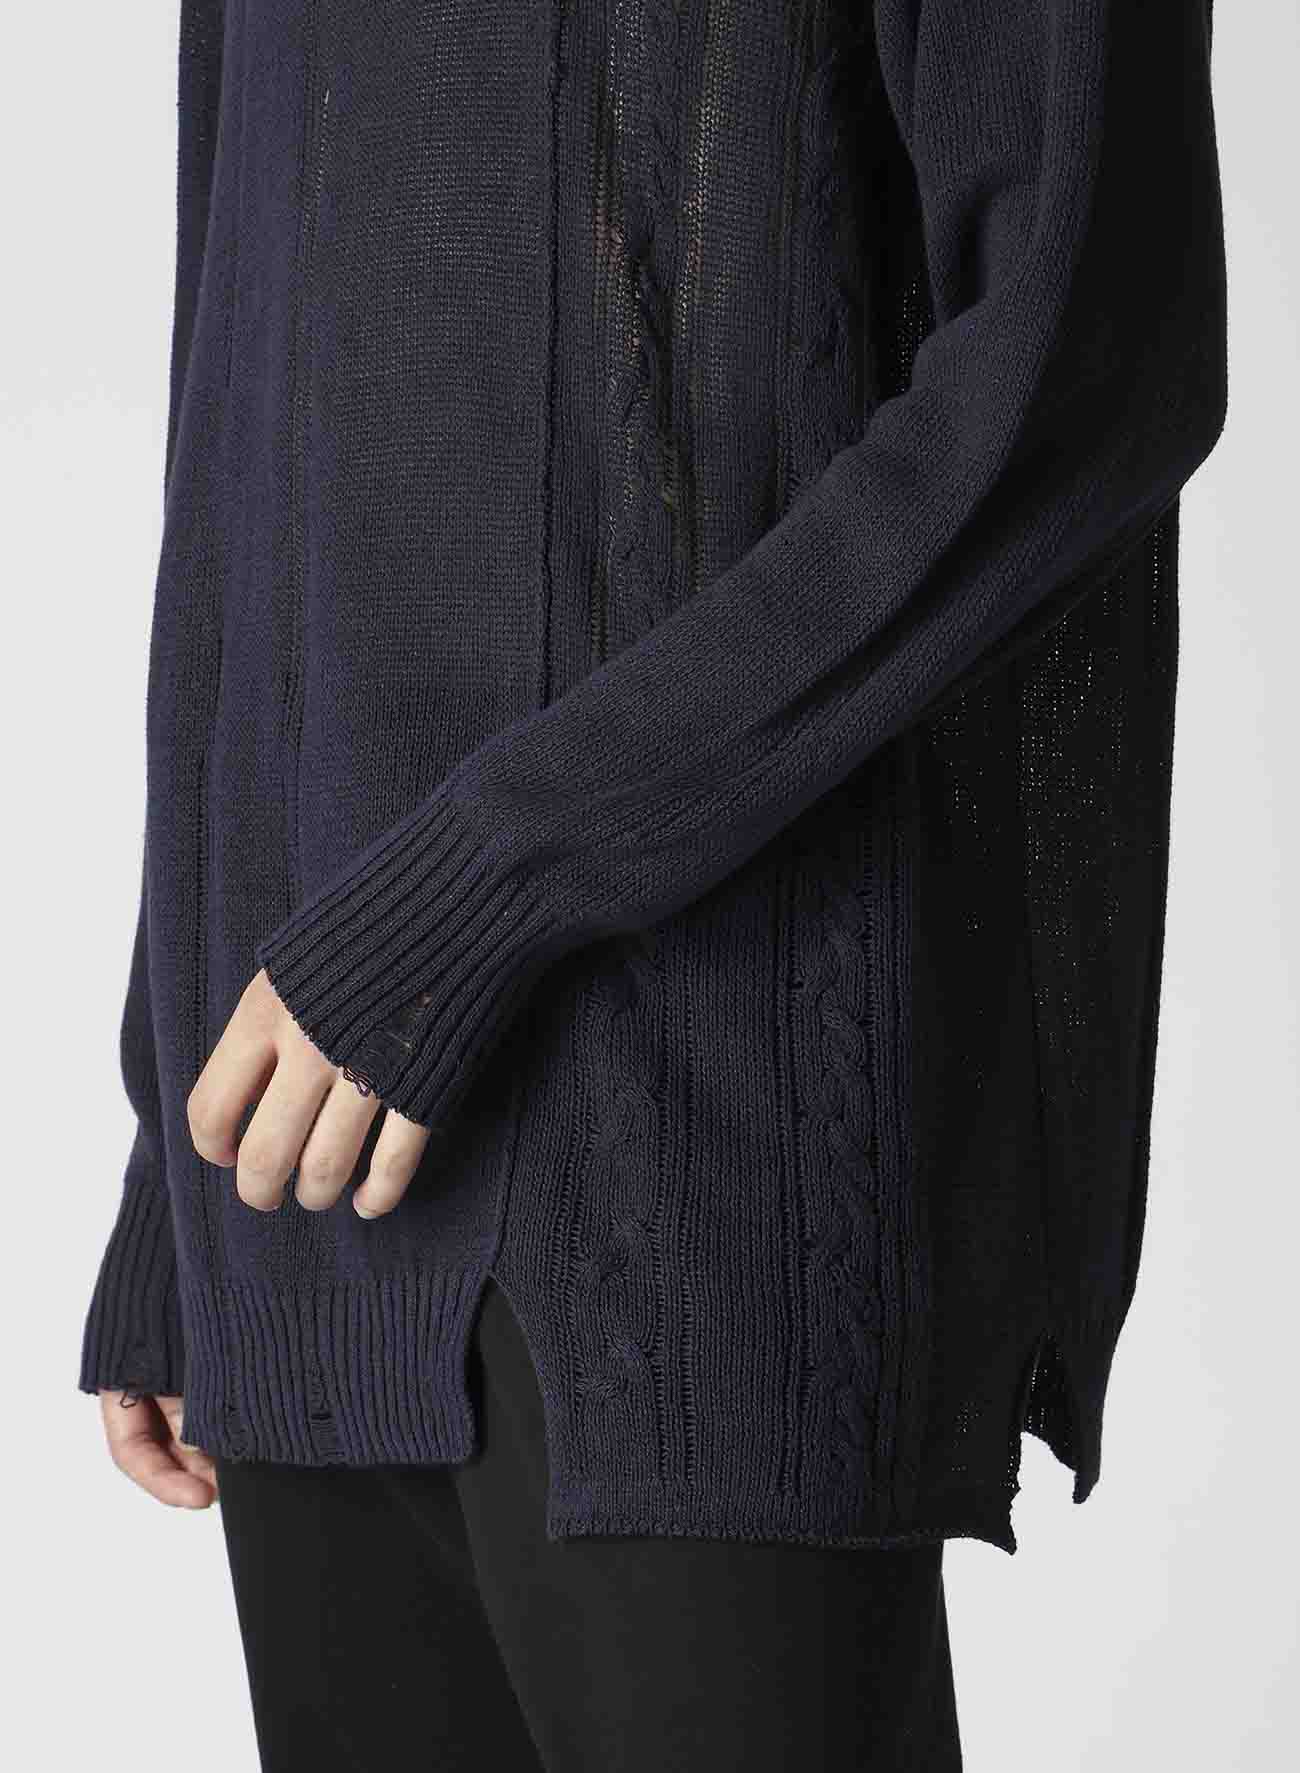 DAMAGE PROCESSED JERSEY CABLE KNITTED PULLOVER